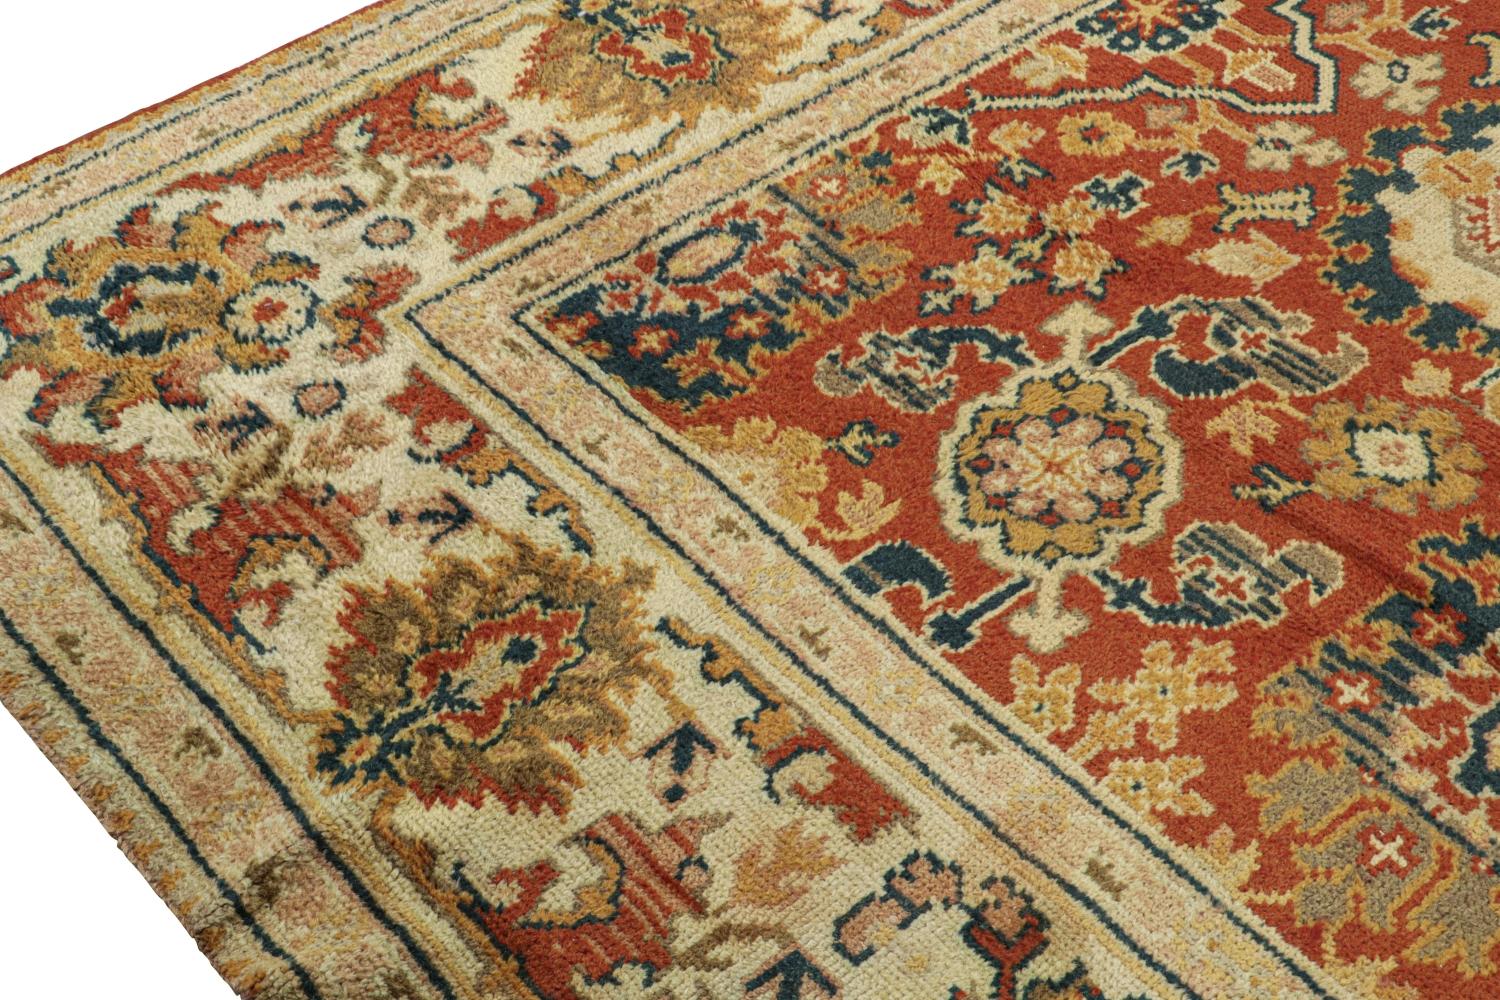 Late 19th Century Antique Arts & Crafts Rug in Rust with Floral Patterns For Sale